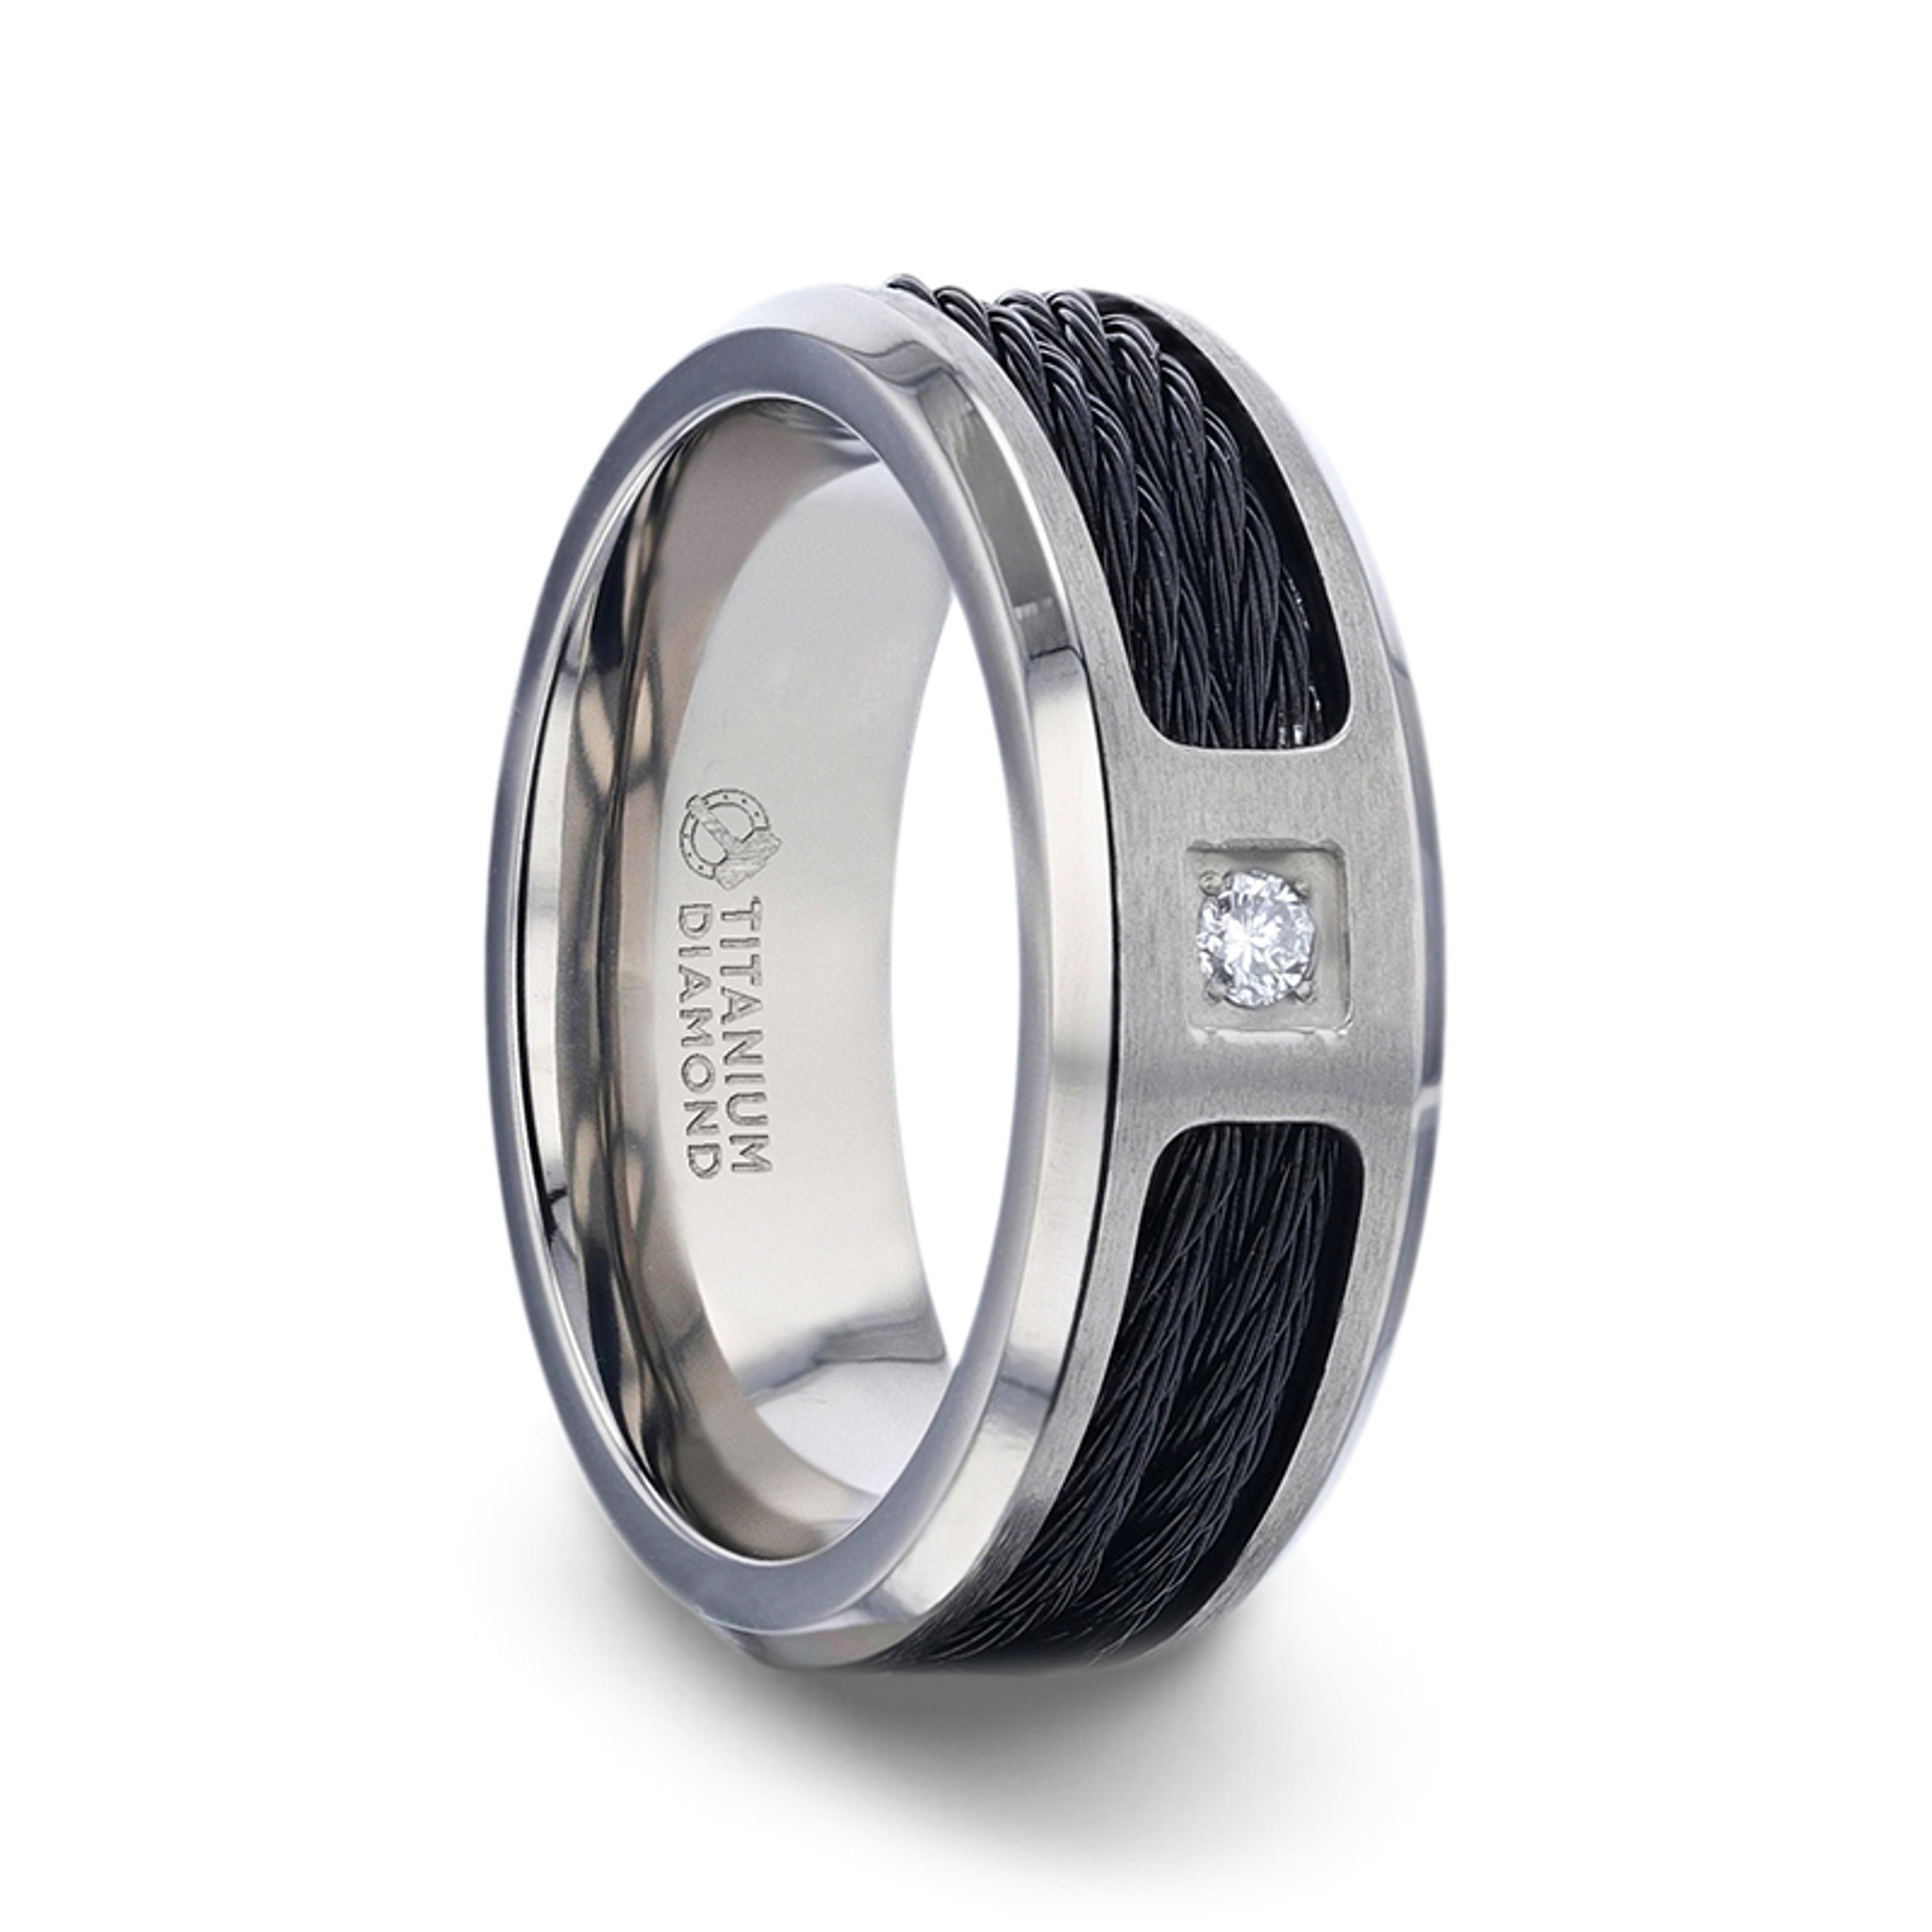 Sector Titanium Men's Wedding Band with Black Cable Inlay & Diamond |  Little King Jewelry